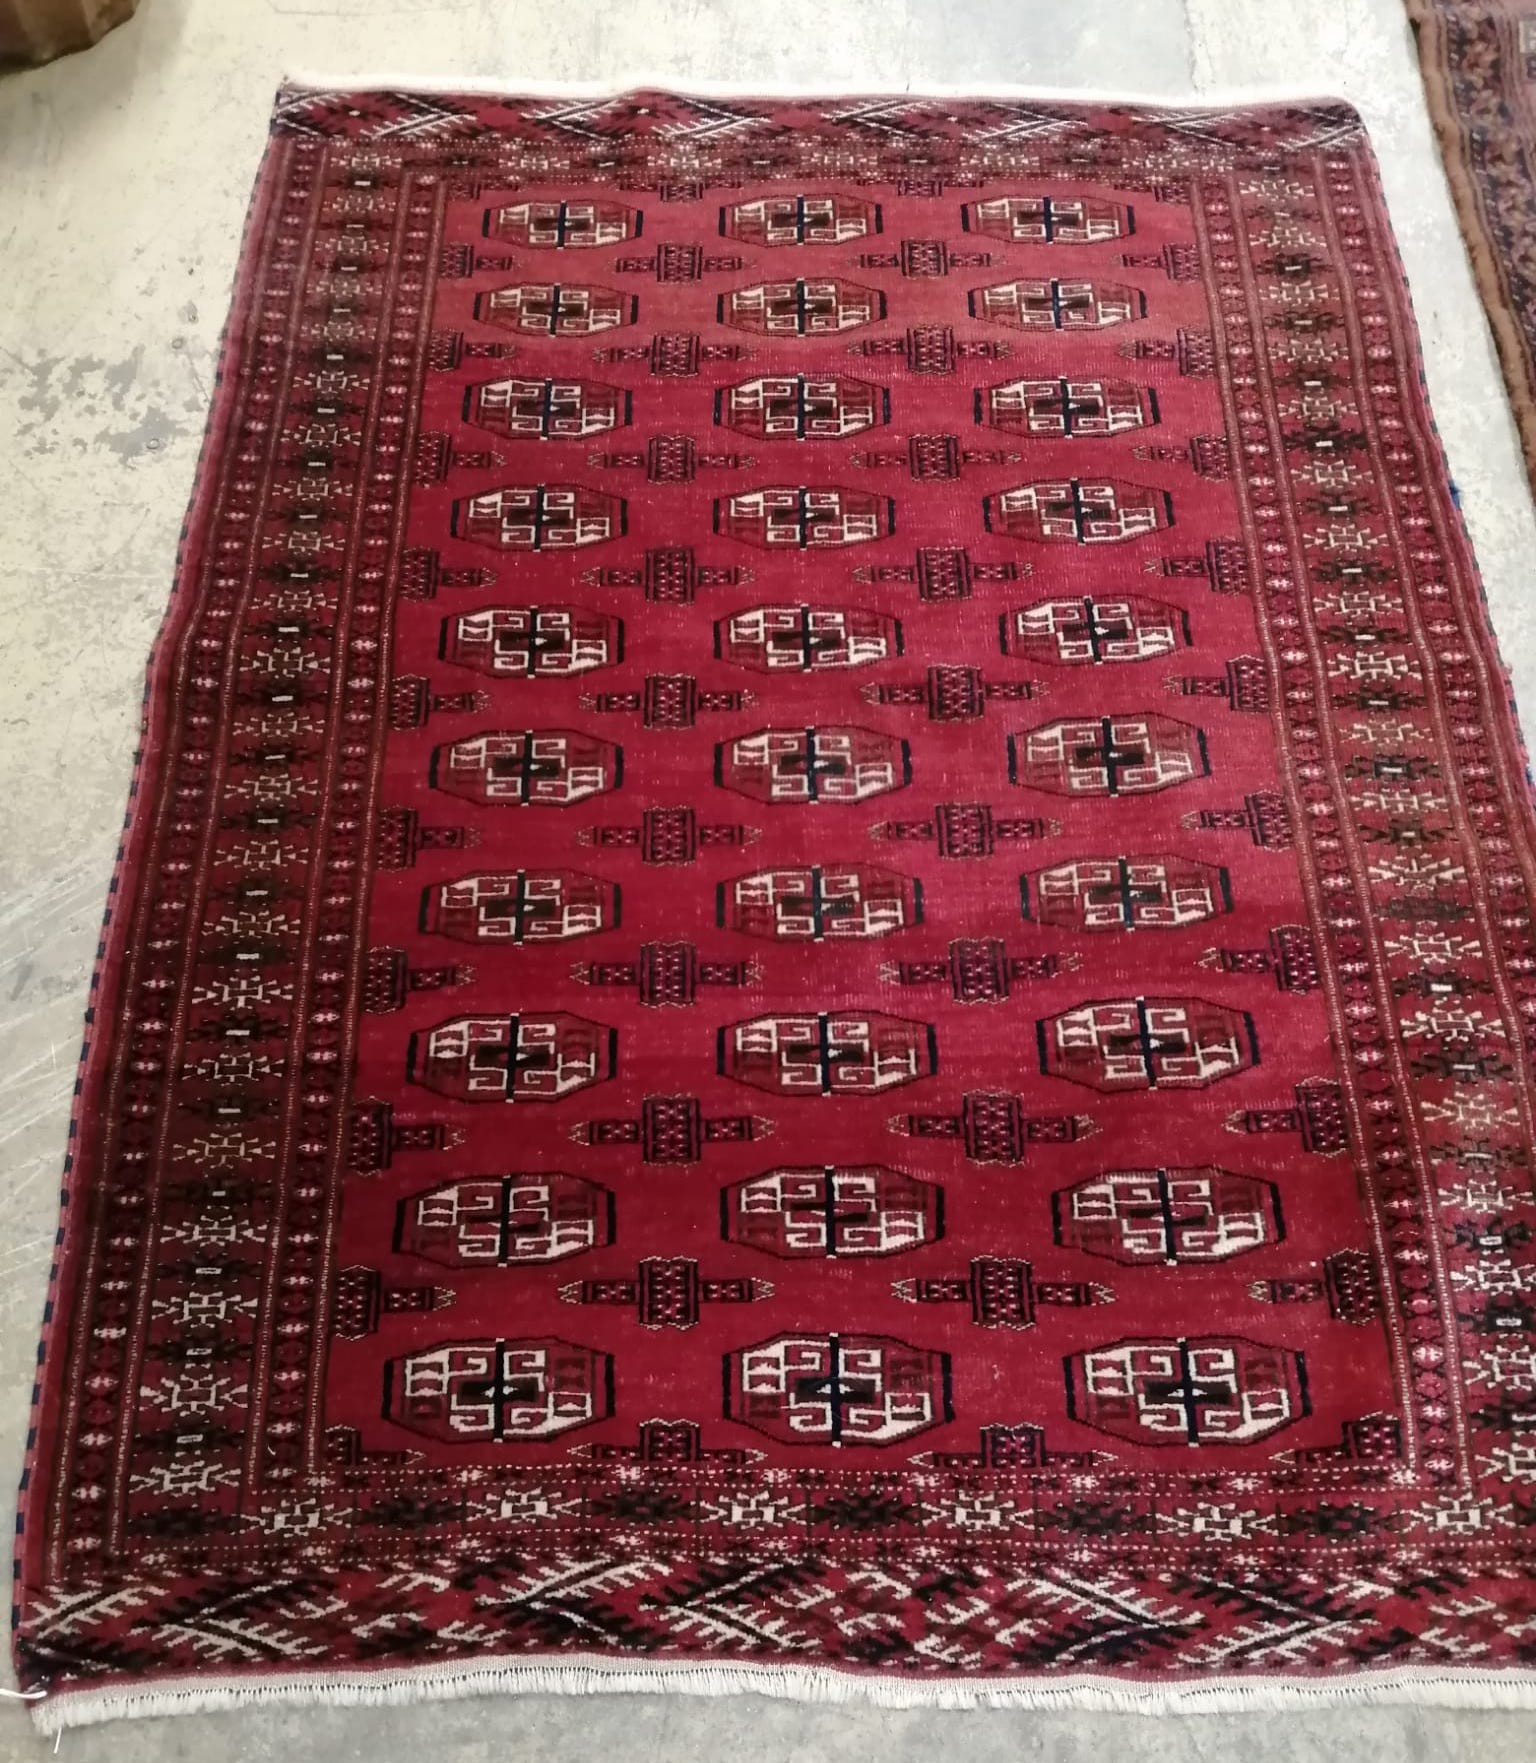 A Bokhara red ground rug, woven with rows of boteh, 160 x 120cm